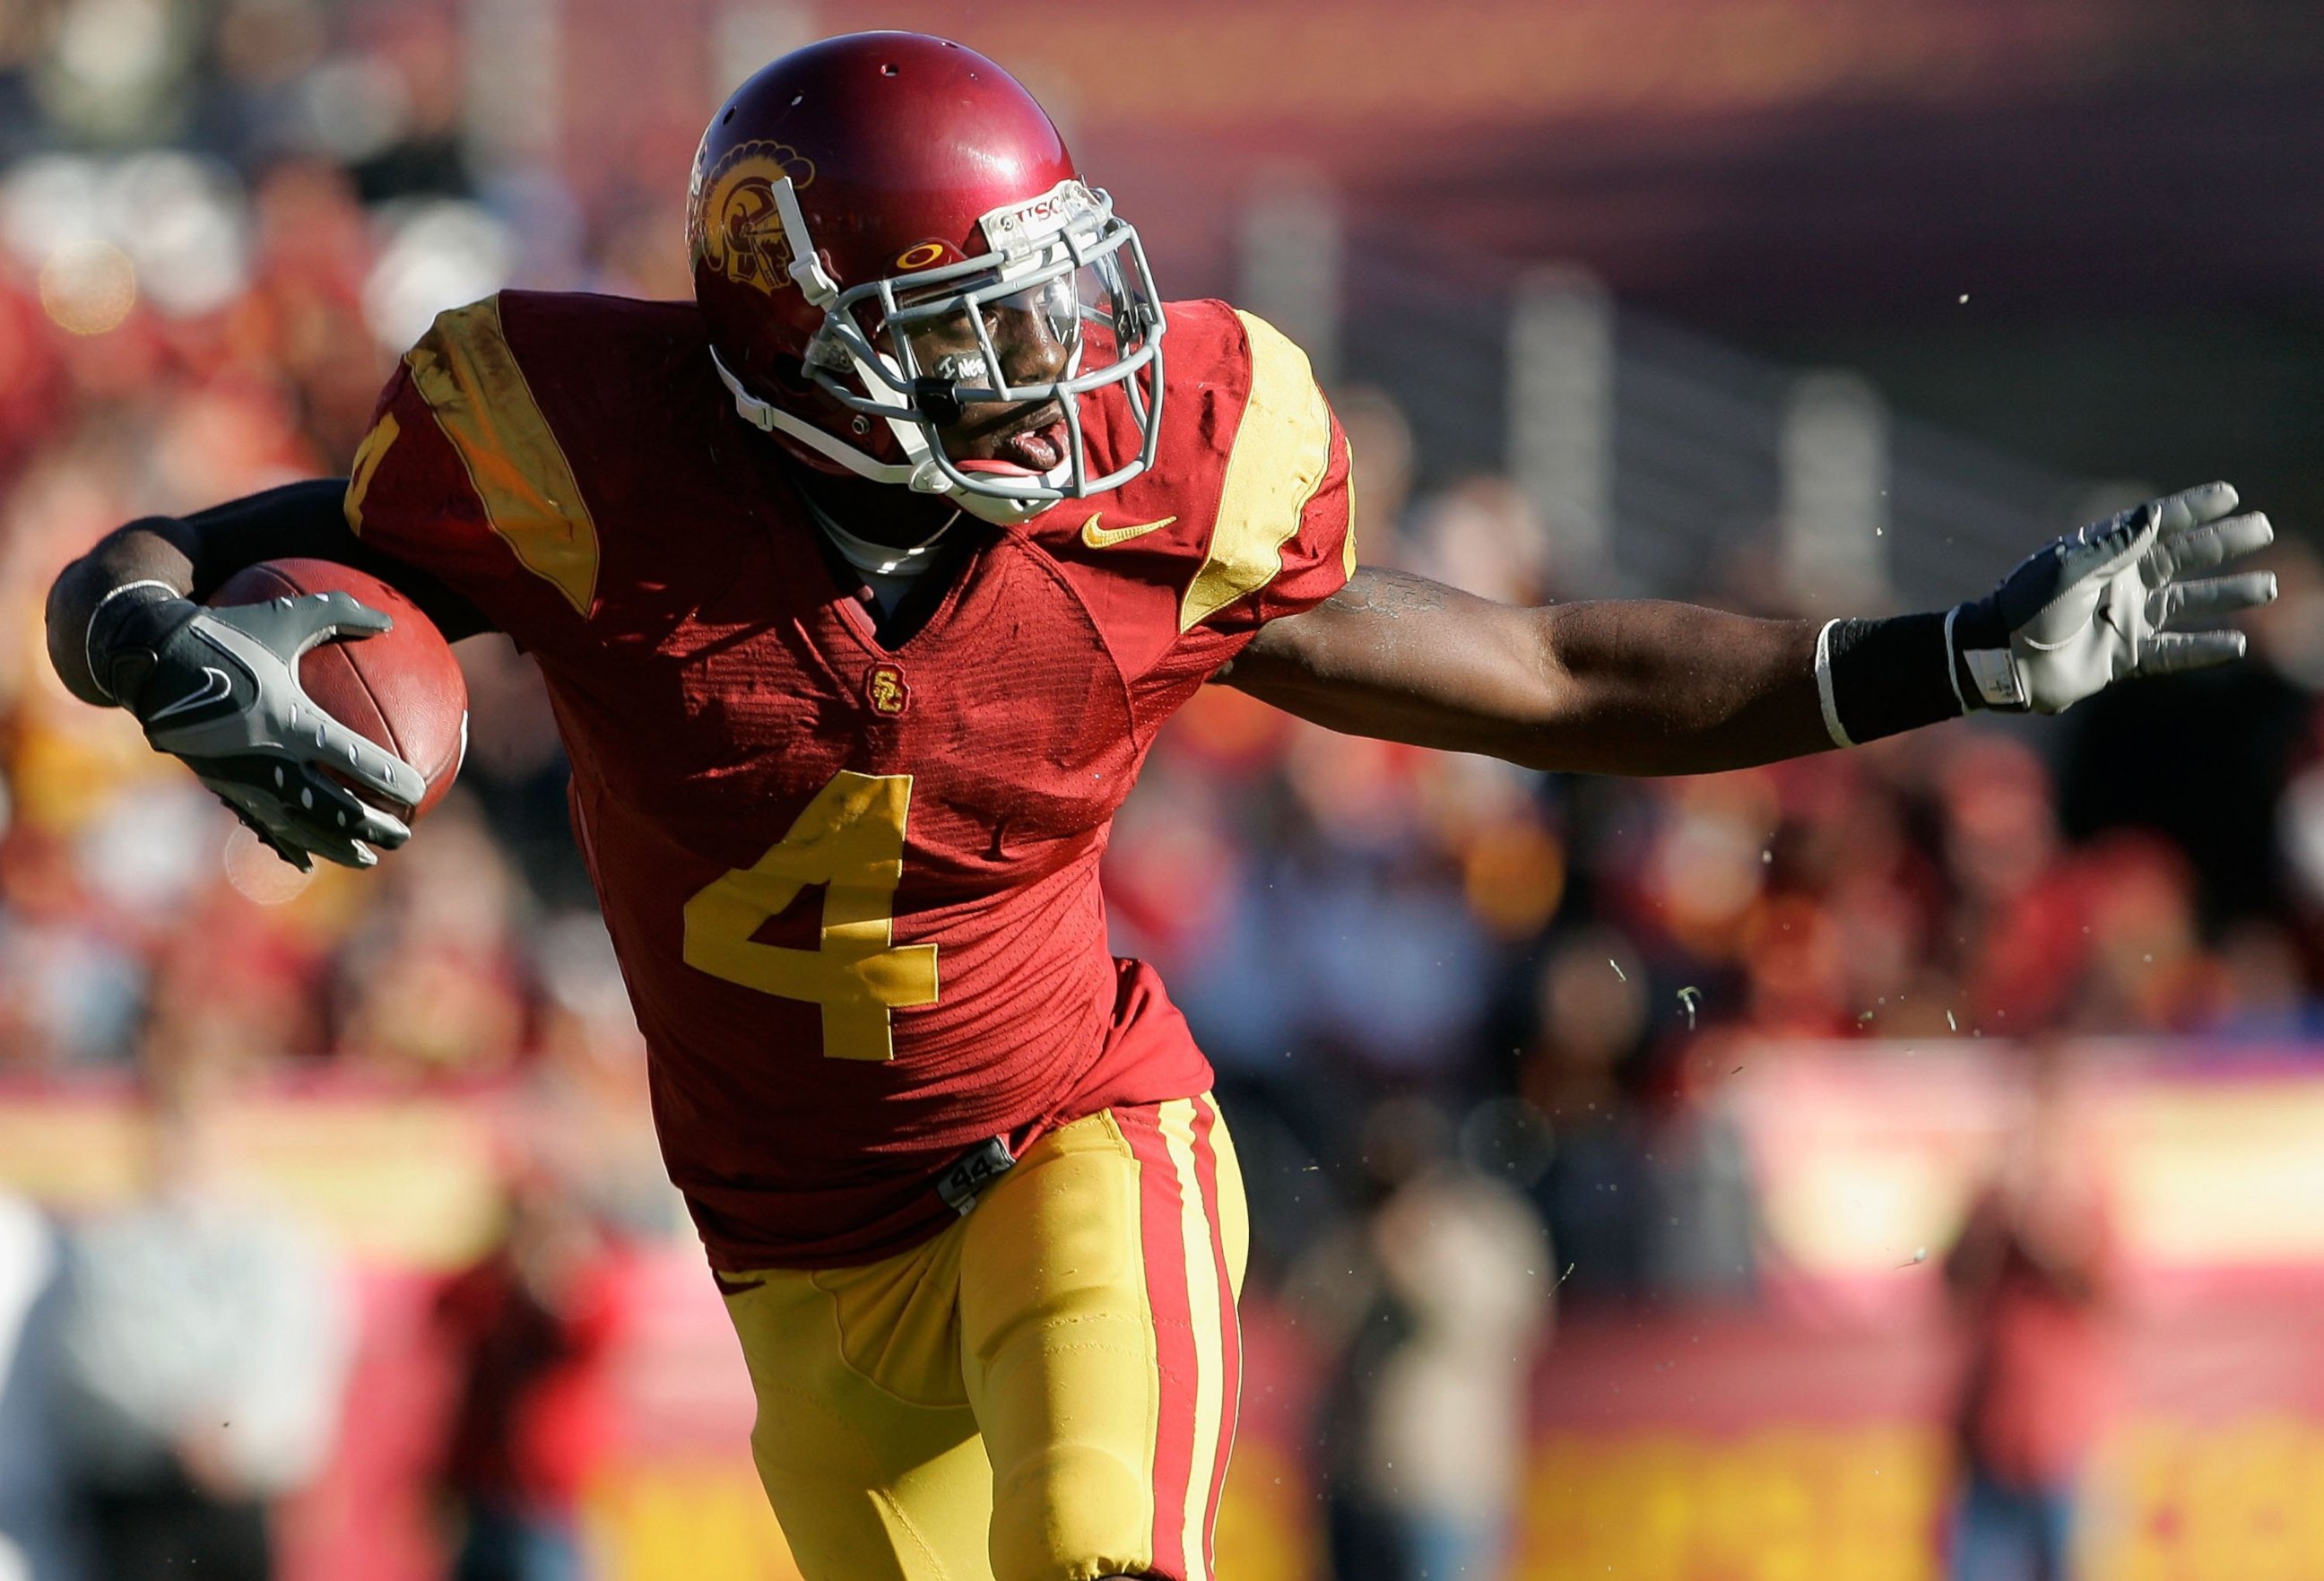 PHOTO: Runningback Joe McKnight #4 of the USC Trojans carries the ball against the UCLA Bruins during the college football game at the Los Angeles Memorial Coliseum, Dec. 1, 2007 in Los Angeles.